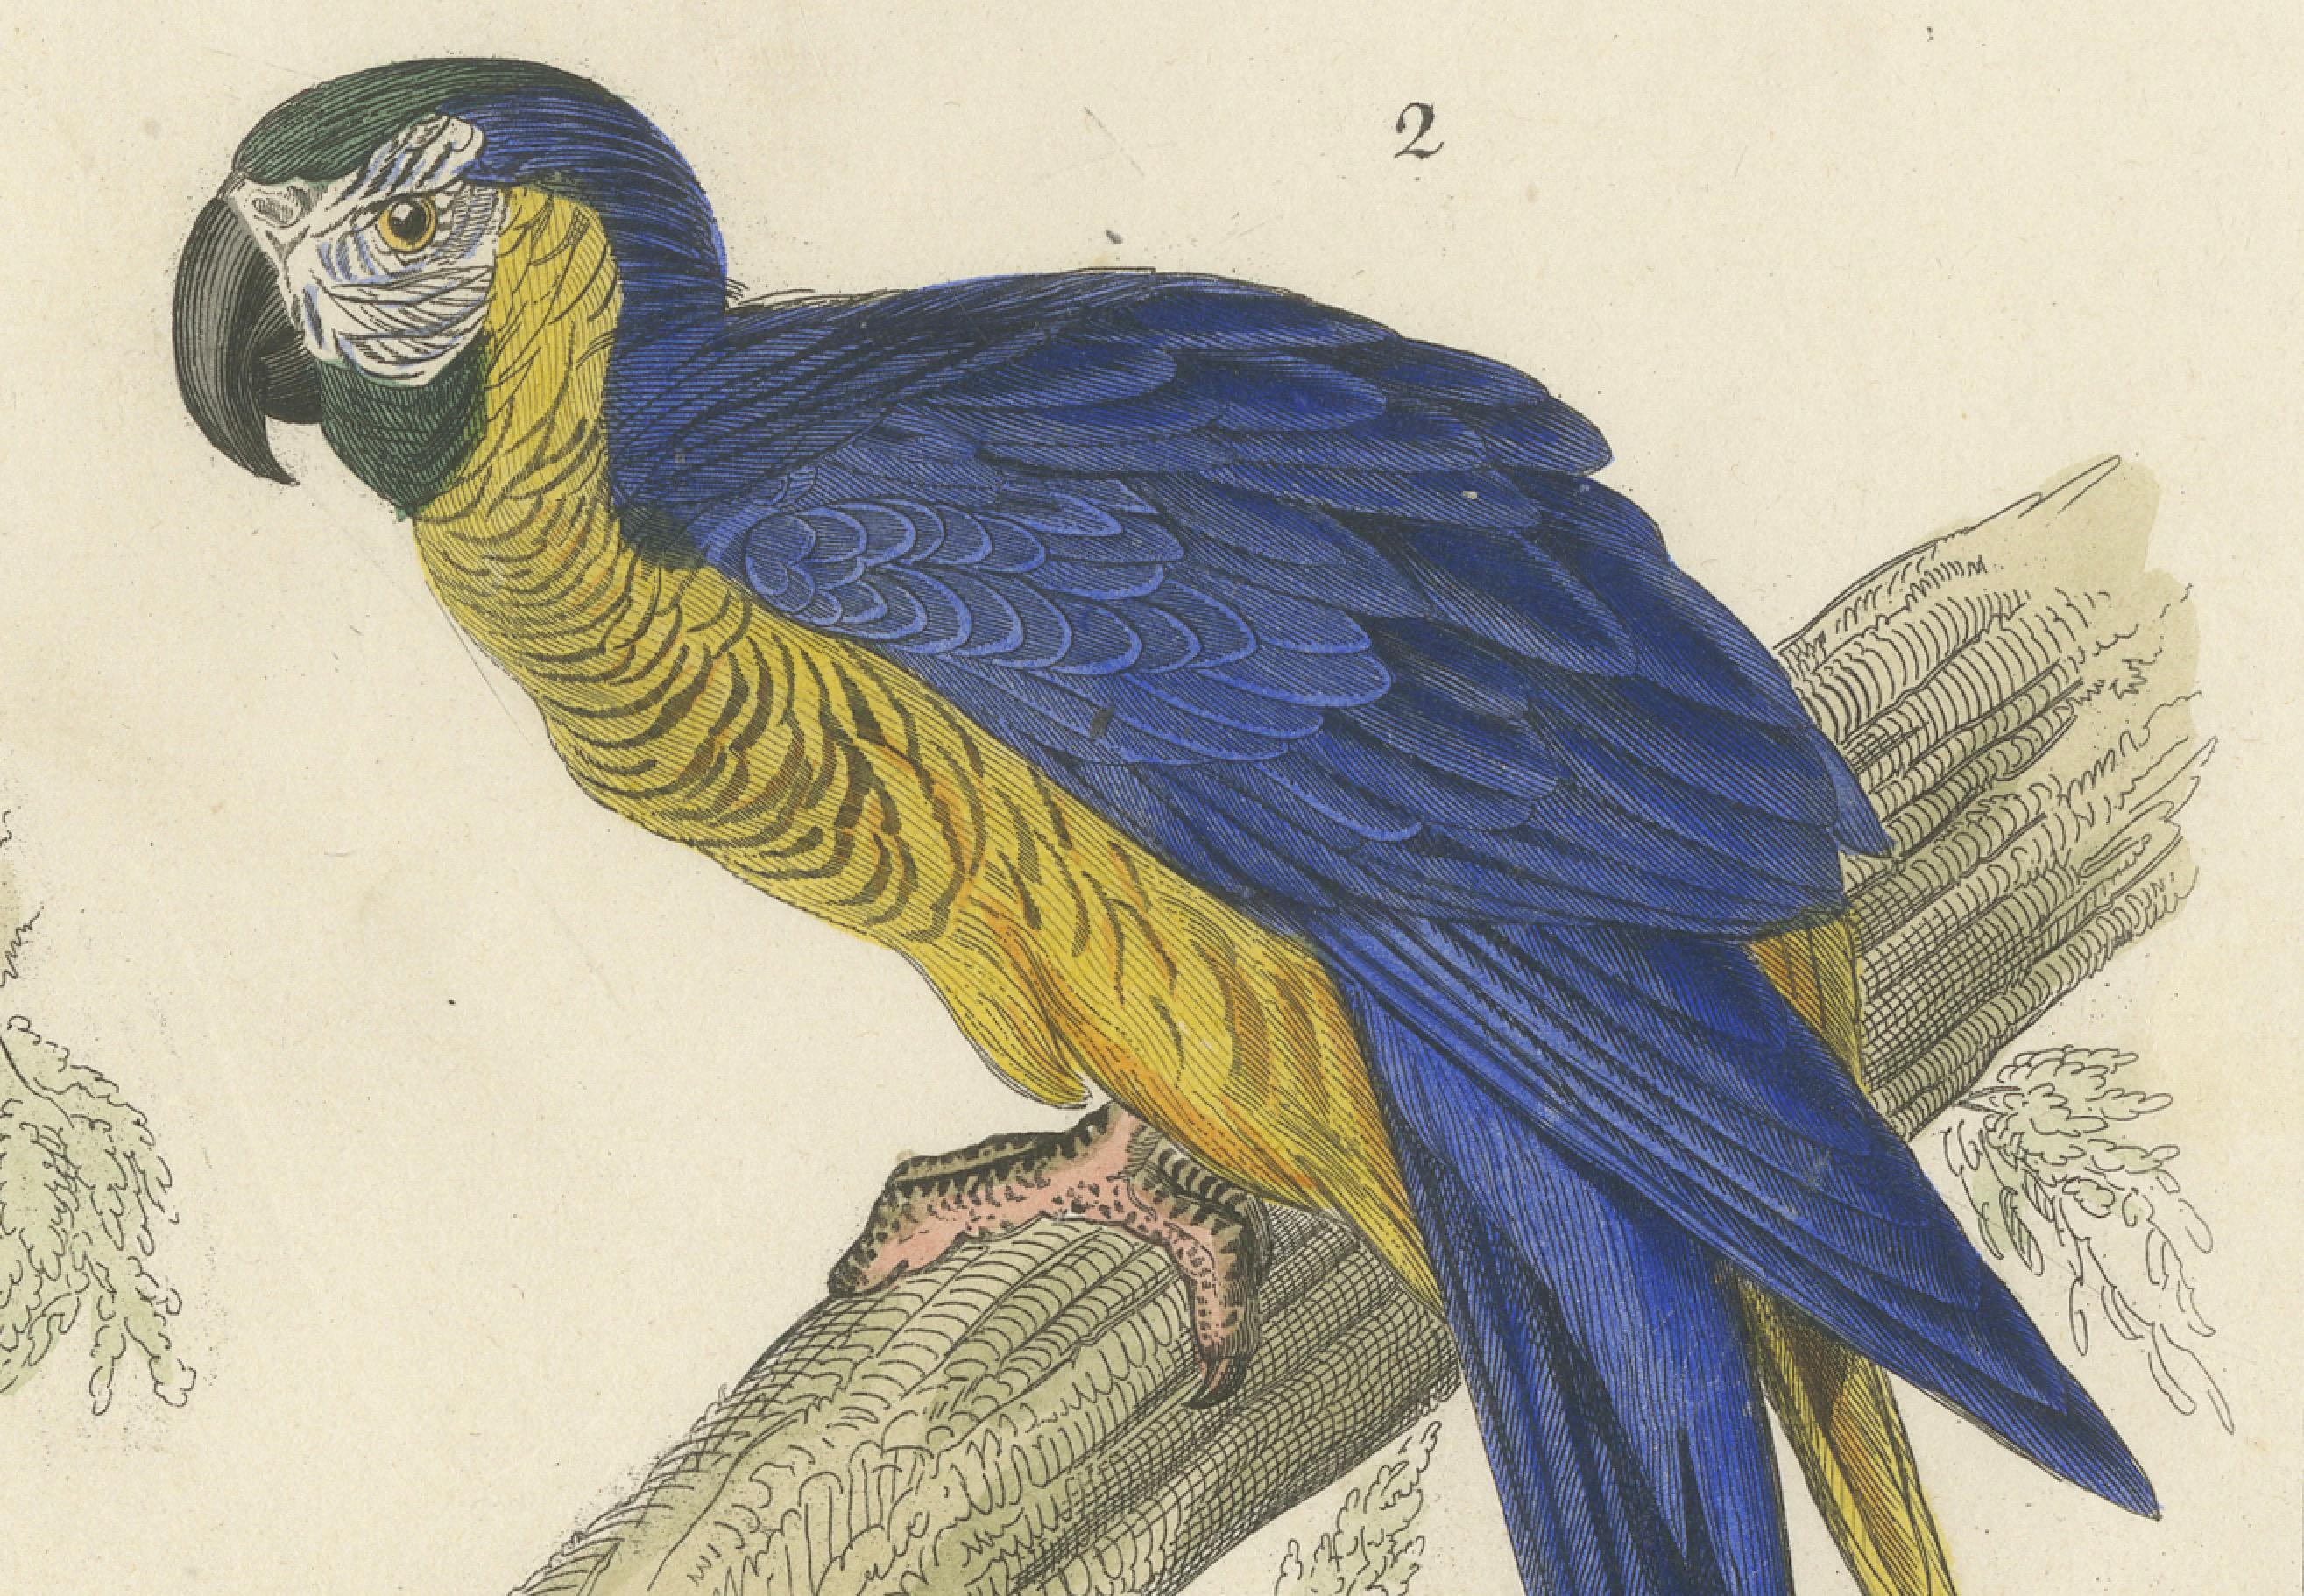 Paper Antique Hand-Colored Bird Print of Macaws of Guiana - a Red and Blue Macaw, 1855 For Sale